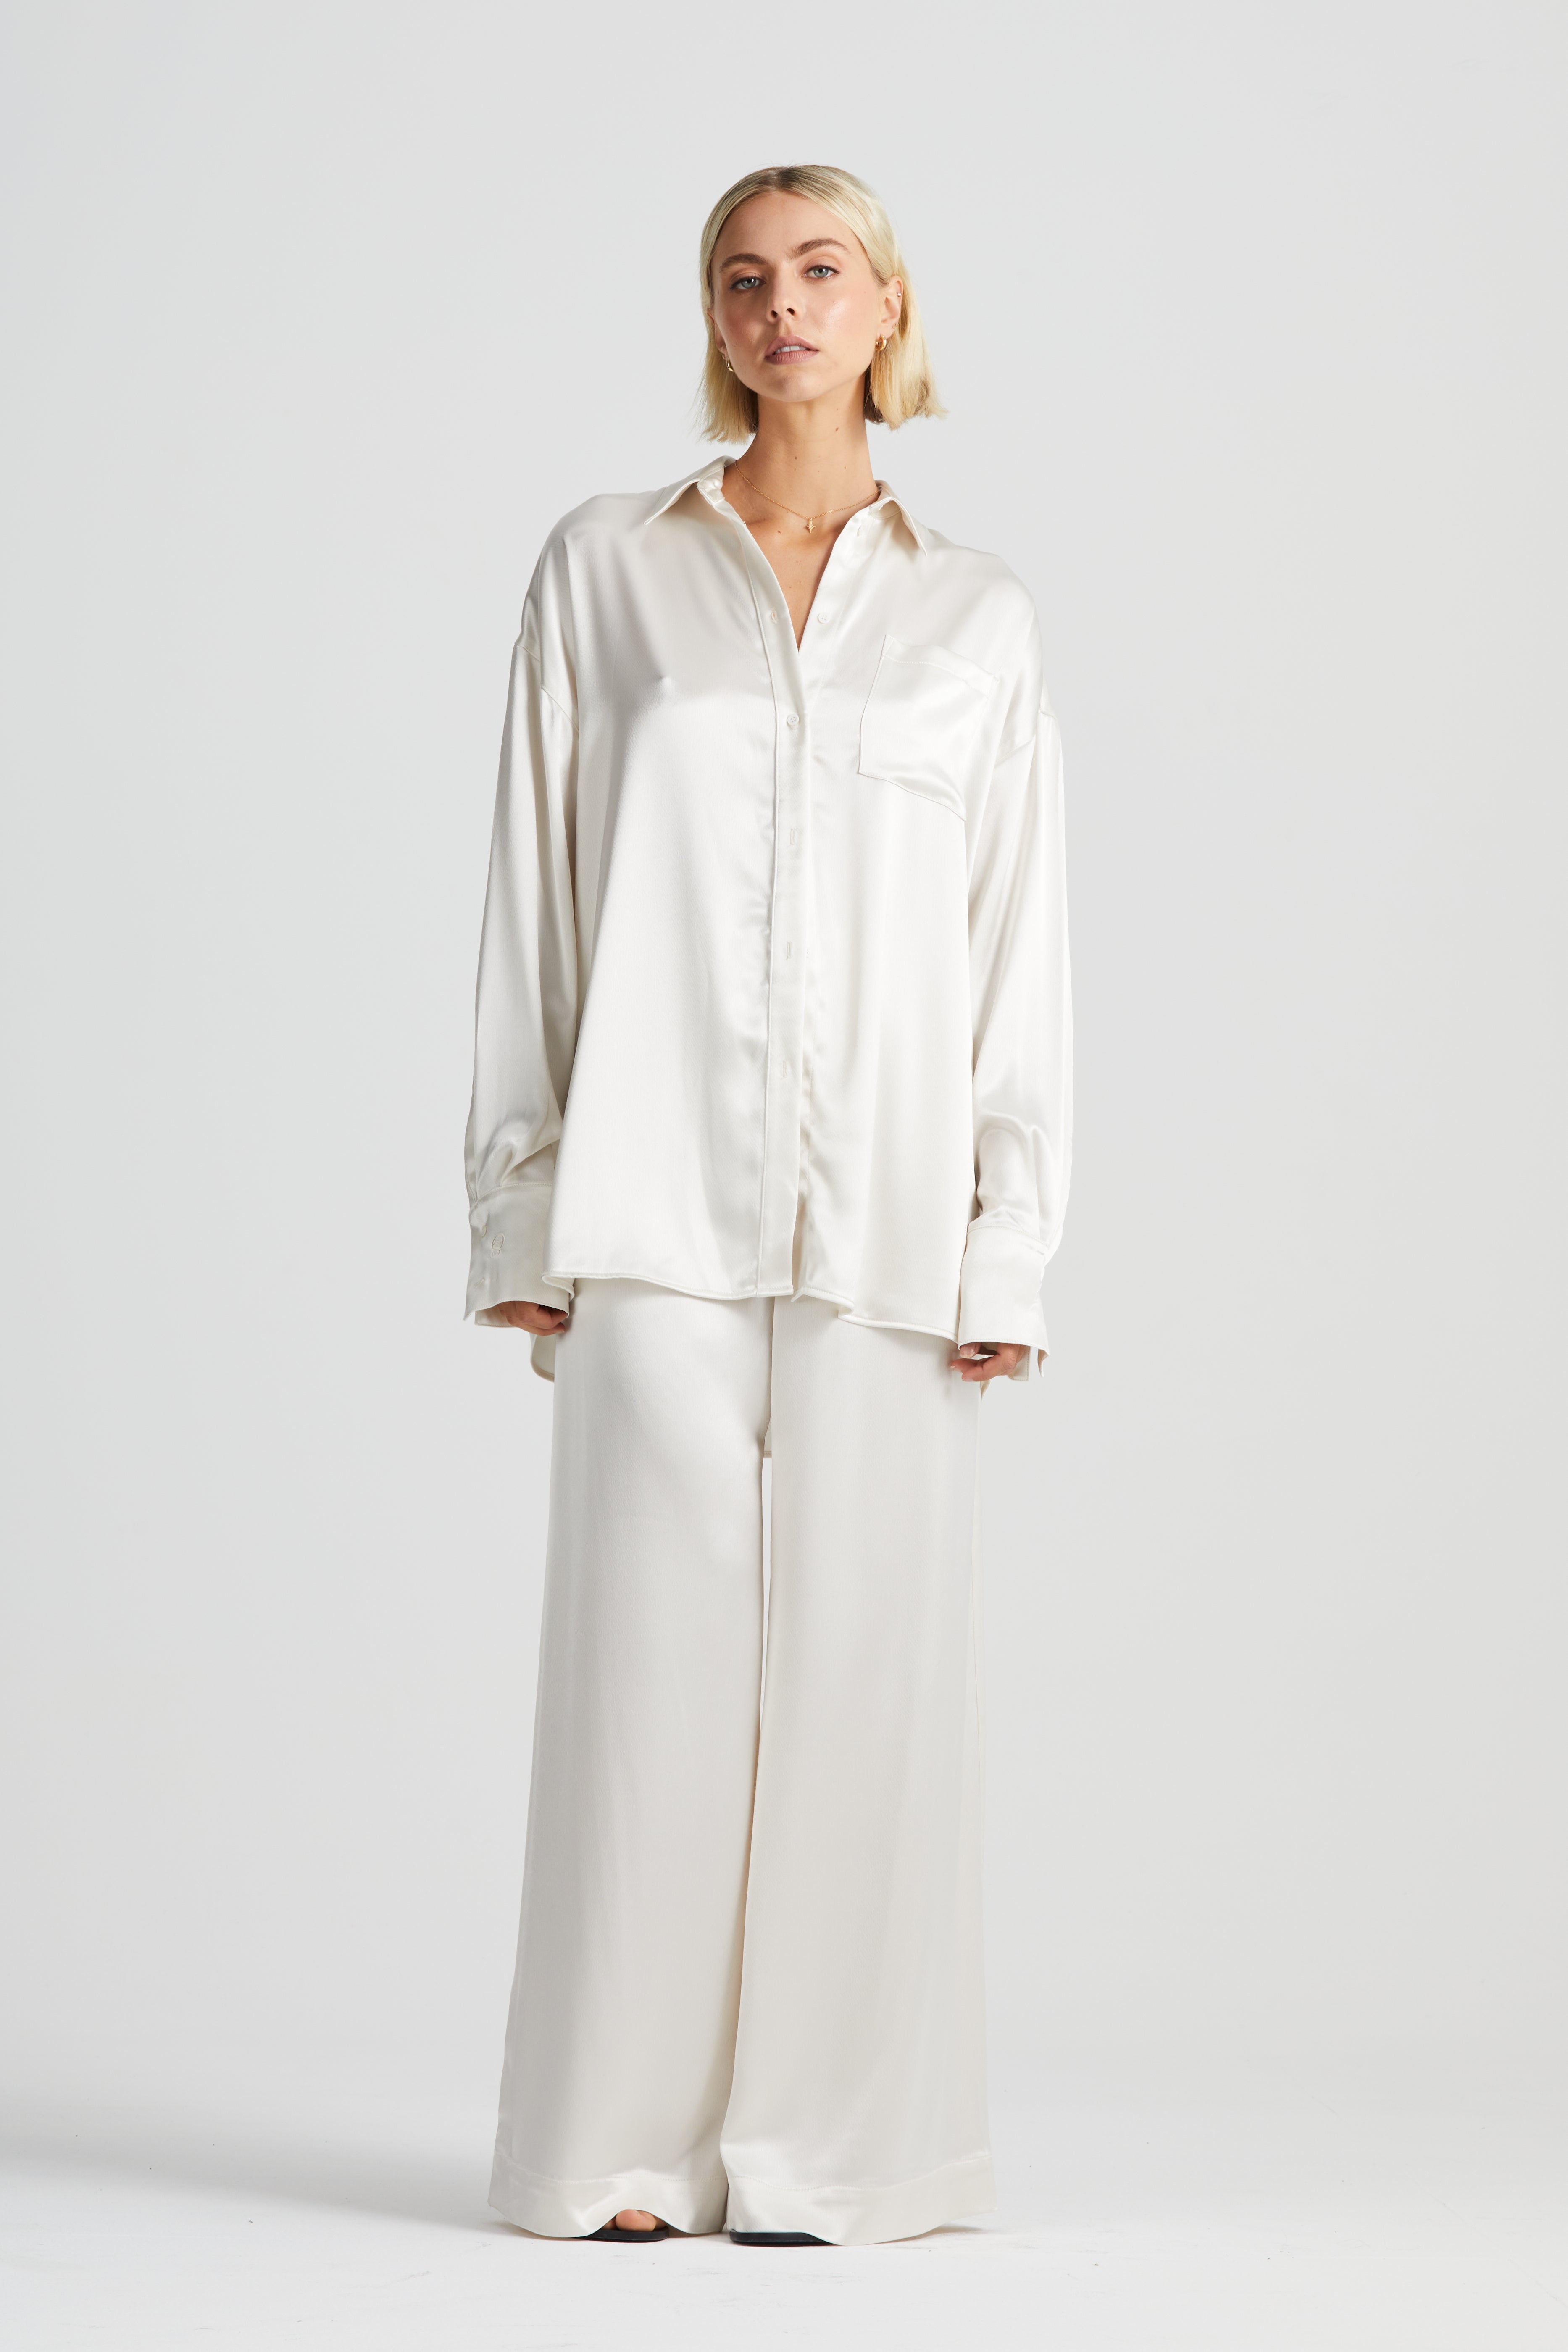 The Luxe Relaxed Monogrammed Shirt | Ivory Satin $509